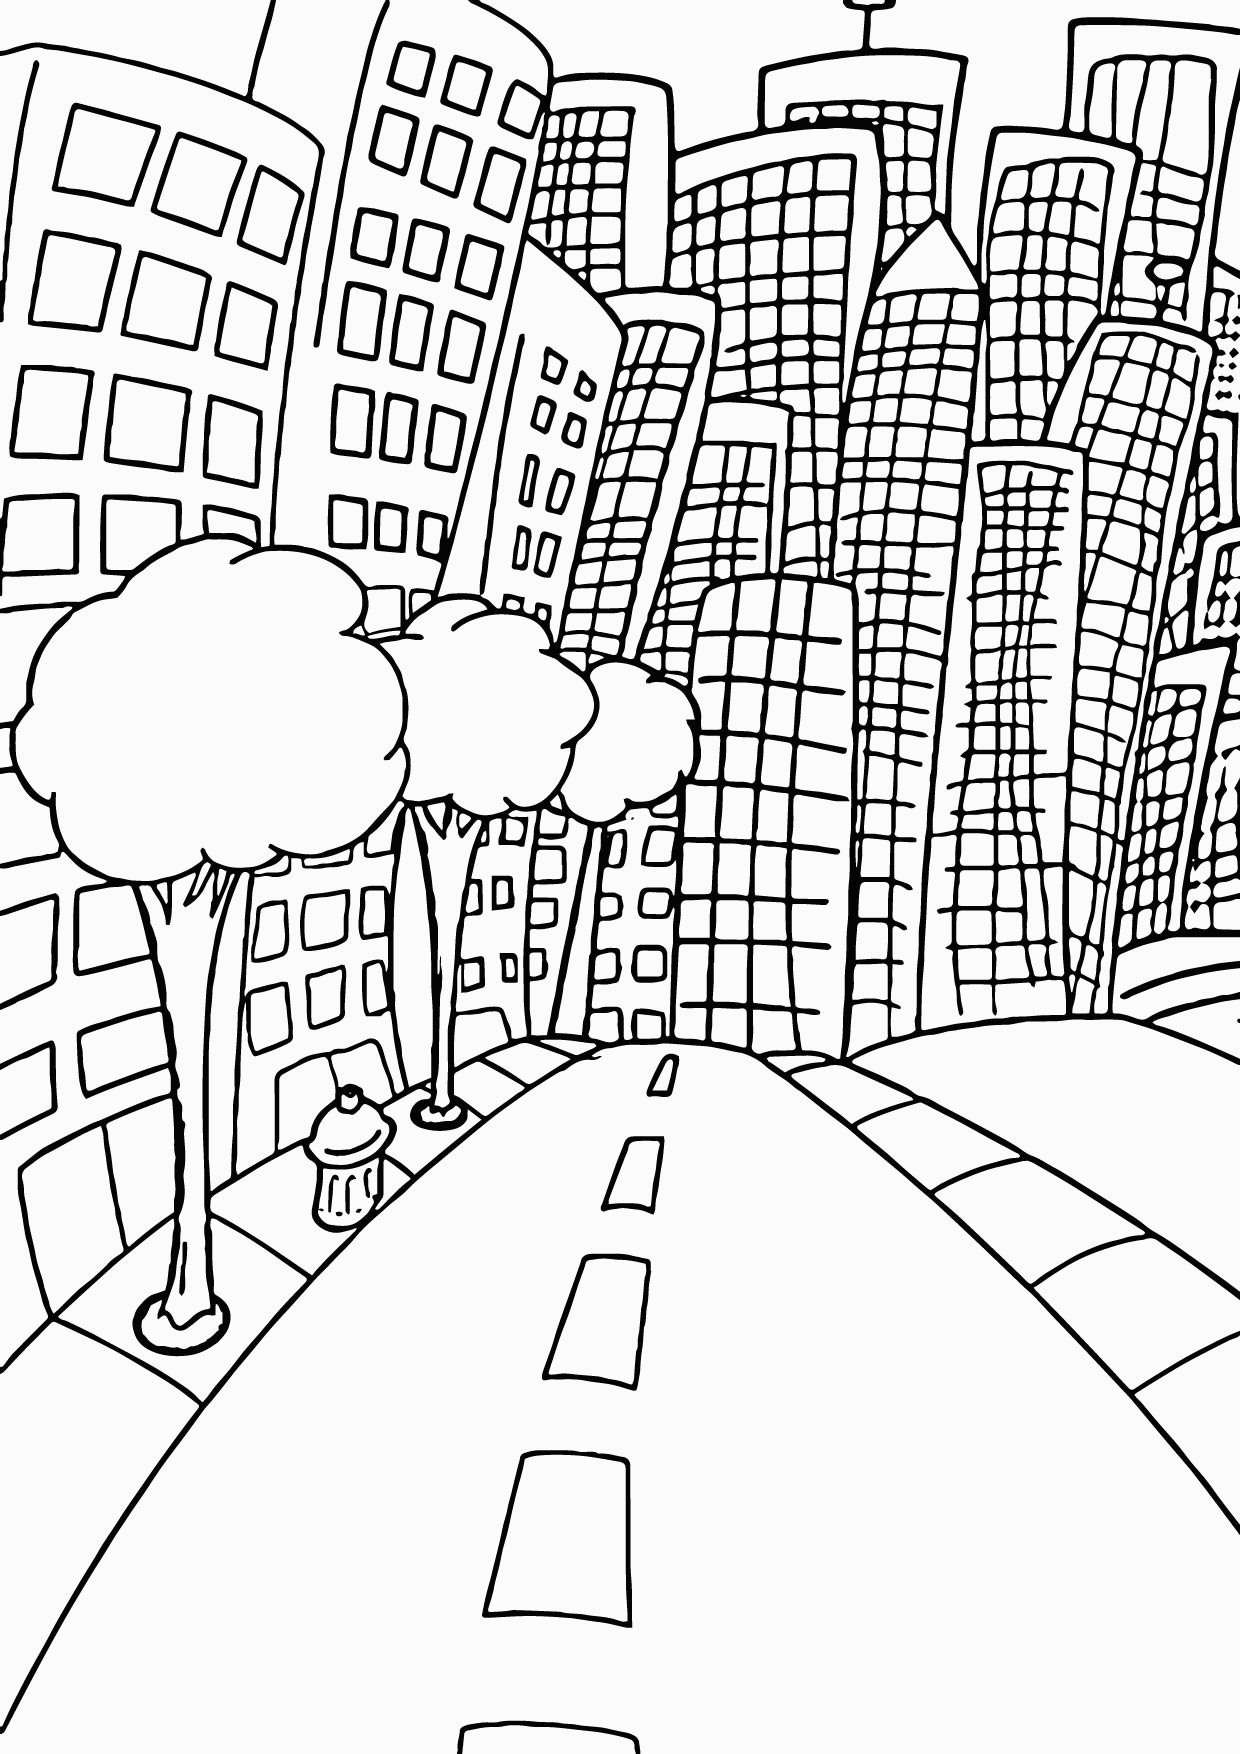 City Coloring Page City Coloring Sheets Soccer Clubs Logos Cool Pages Grig3 For City